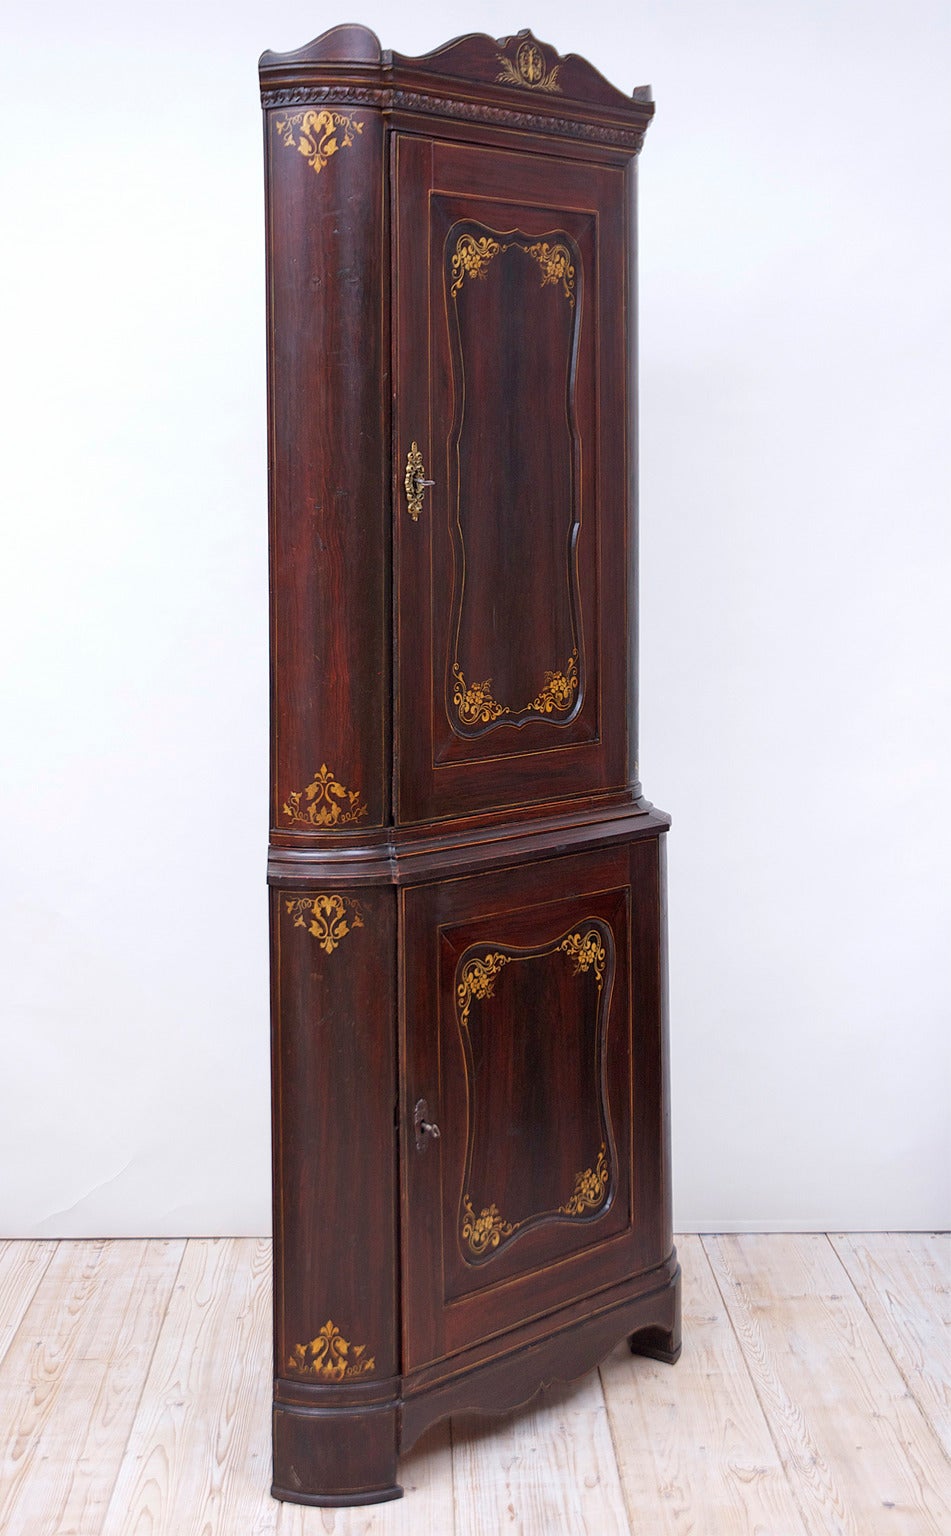 A rare and stately corner cupboard with the original faux-boix finish and hand-painted gold foliate and flower design around the recessed door panels and rounded sides, with a painted butterfly on the center of the tiara-top. Bremen, Germany, circa